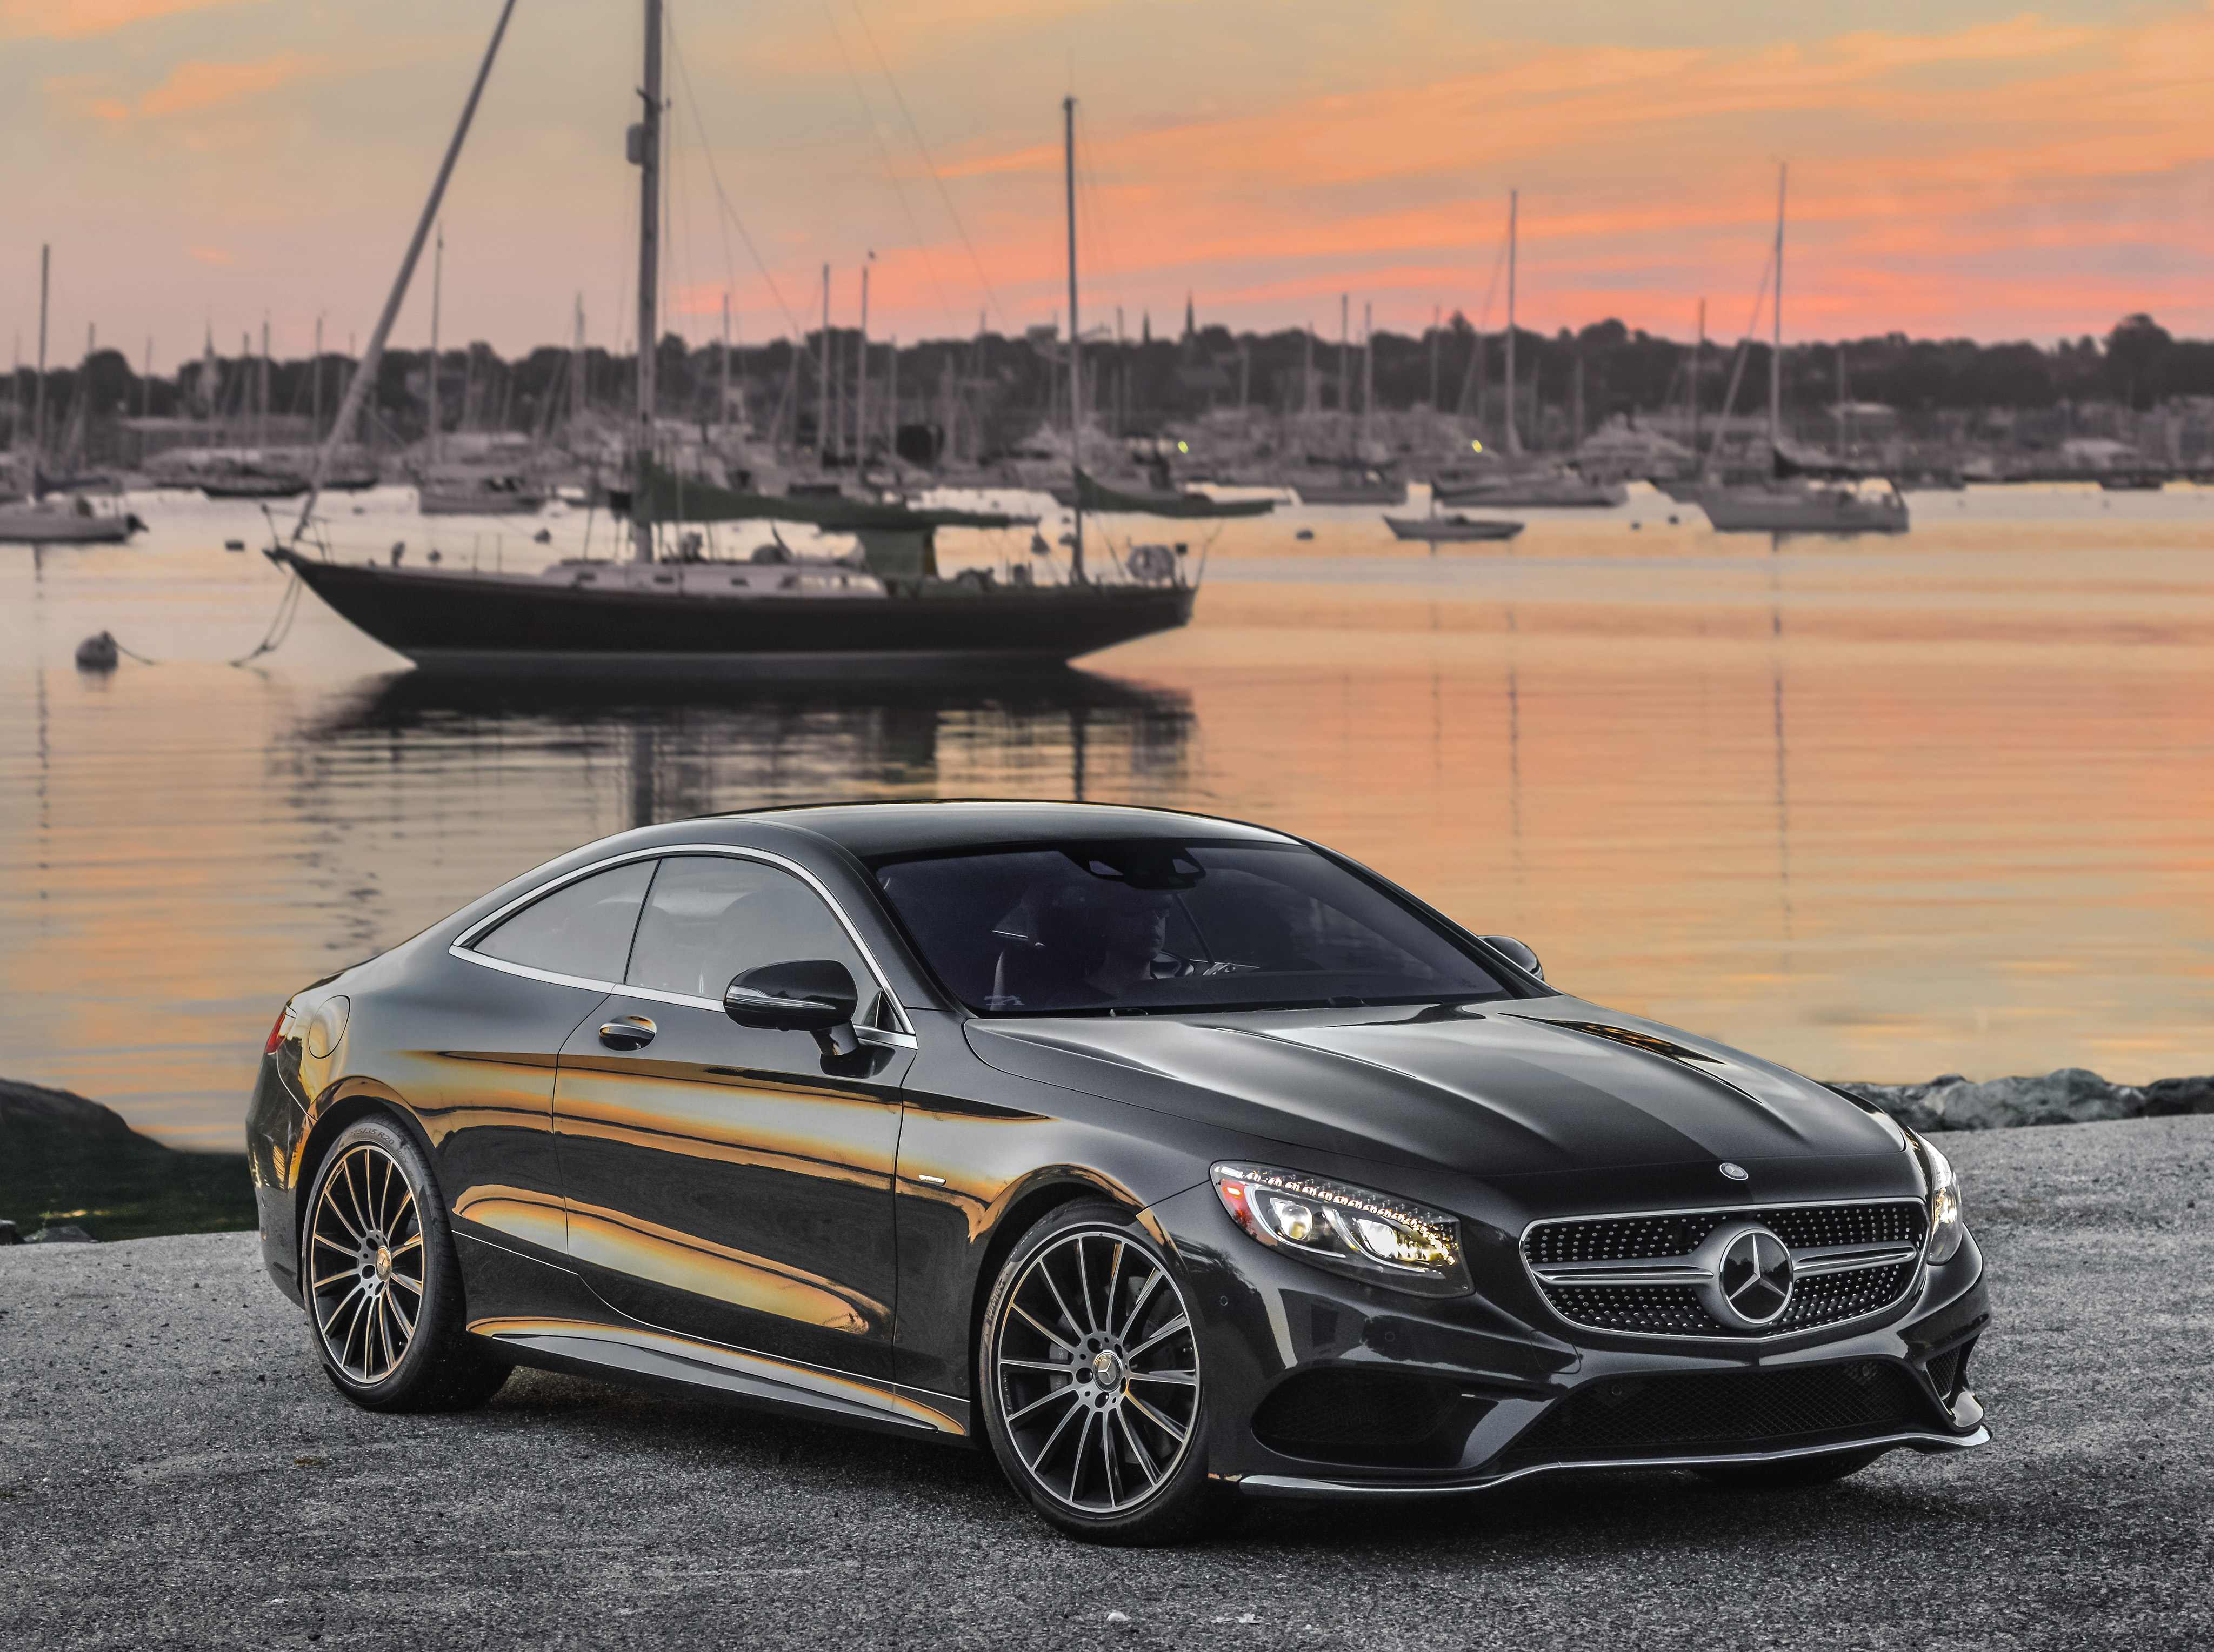 cars, amg, s-class, s 550 Mercedes-Benz Tablet Wallpapers